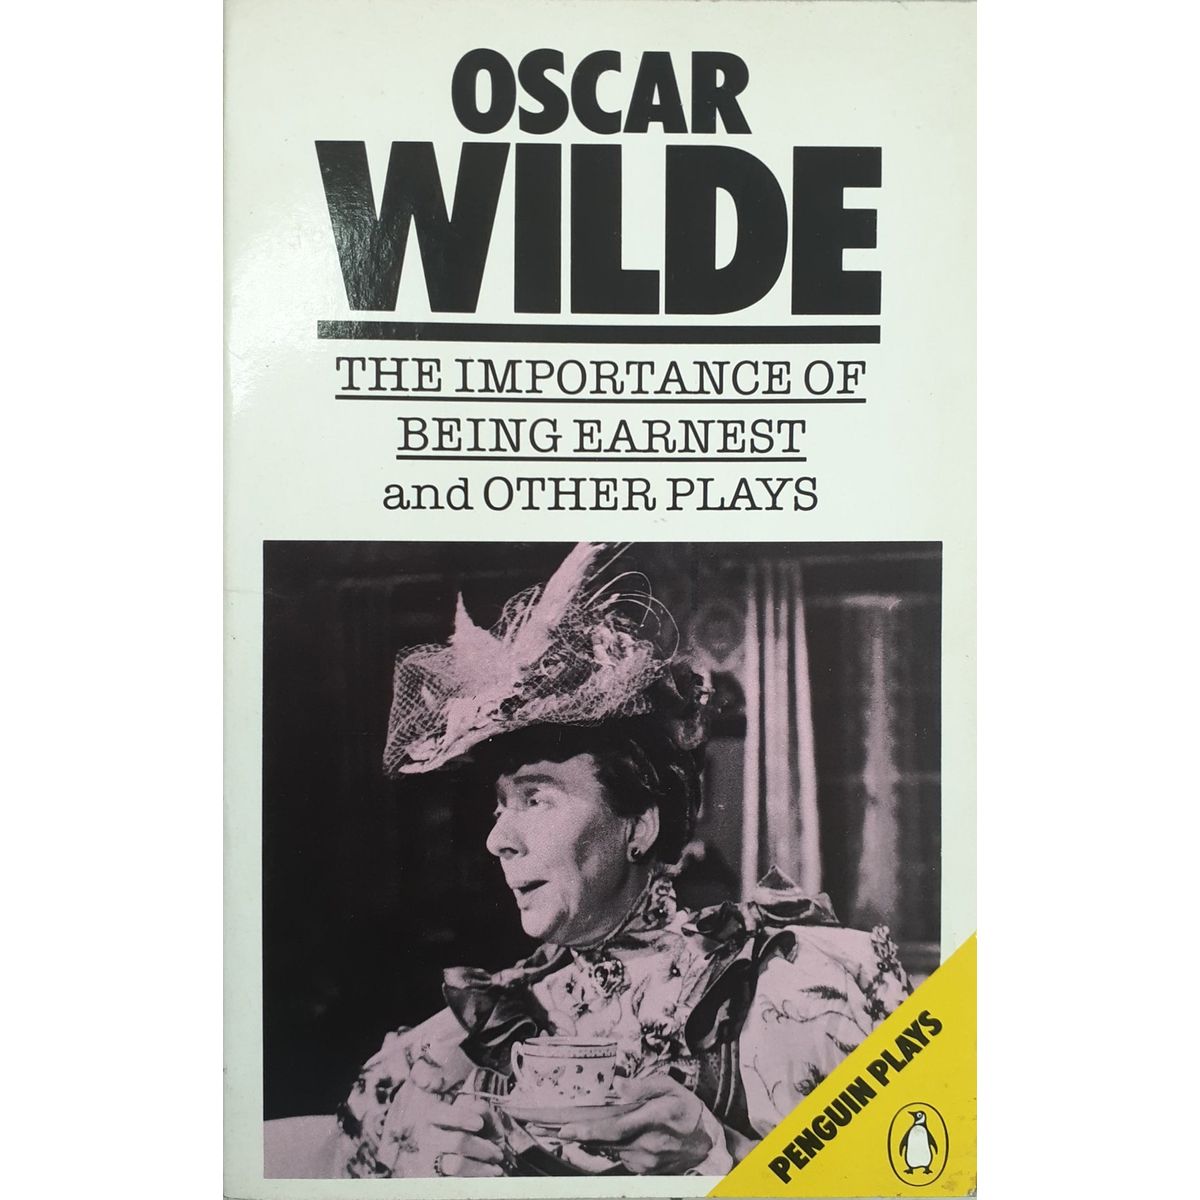 ISBN: 9780140482096 / 0140482091 - The Importance of Being Earnest and Other Plays by Oscar Wilde [1986]